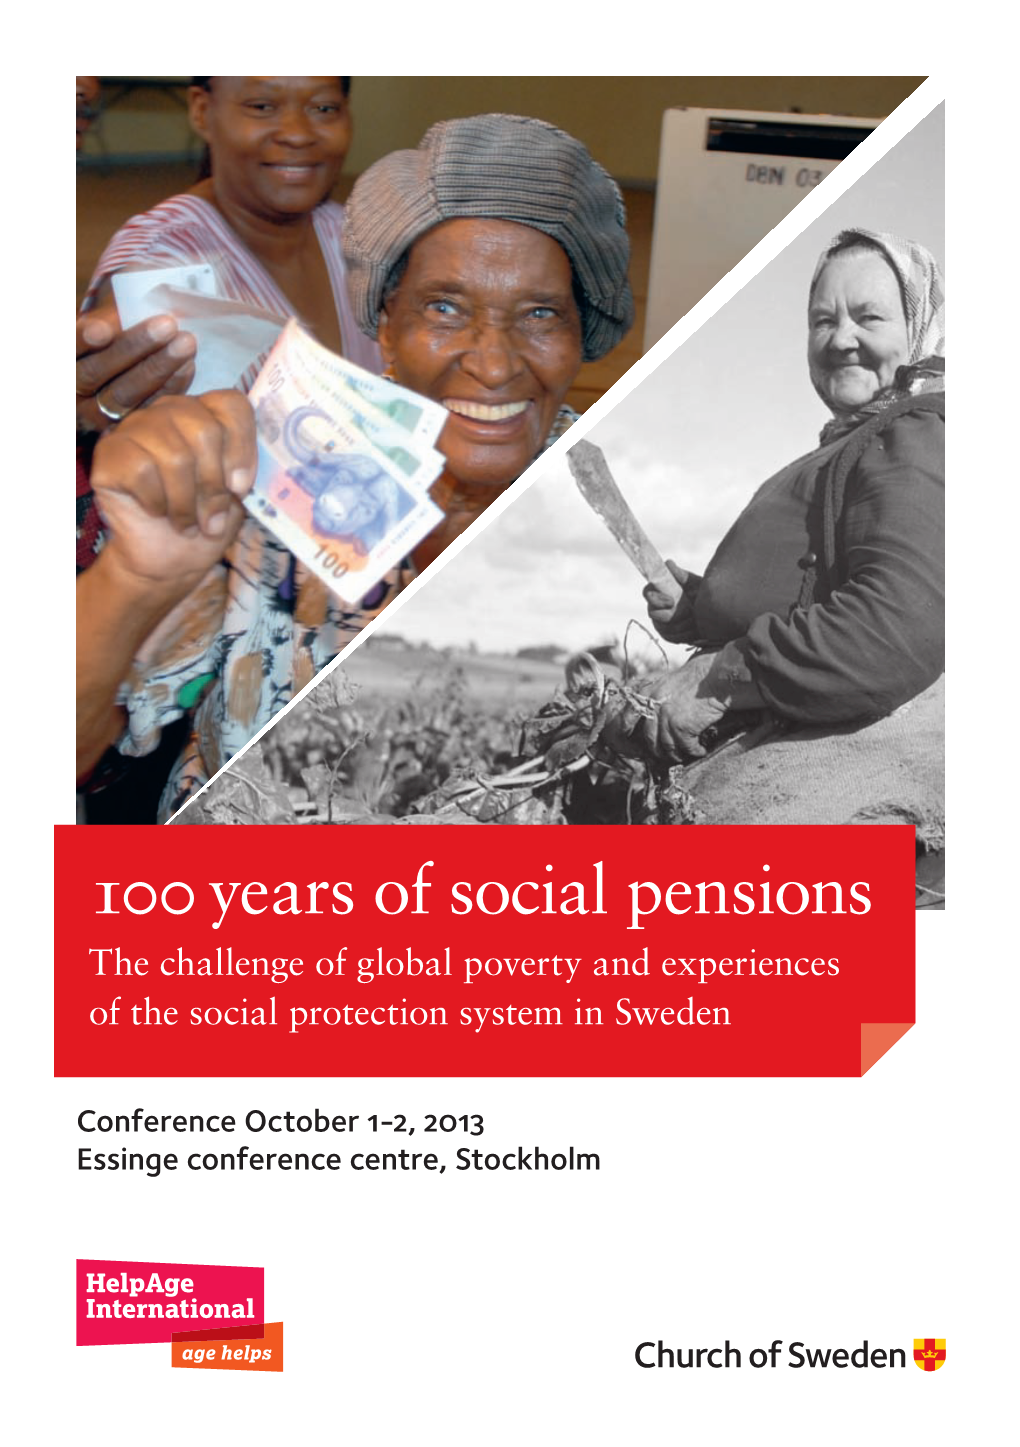 100 Years of Social Pensions the Challenge of Global Poverty and Experiences of the Social Protection System in Sweden